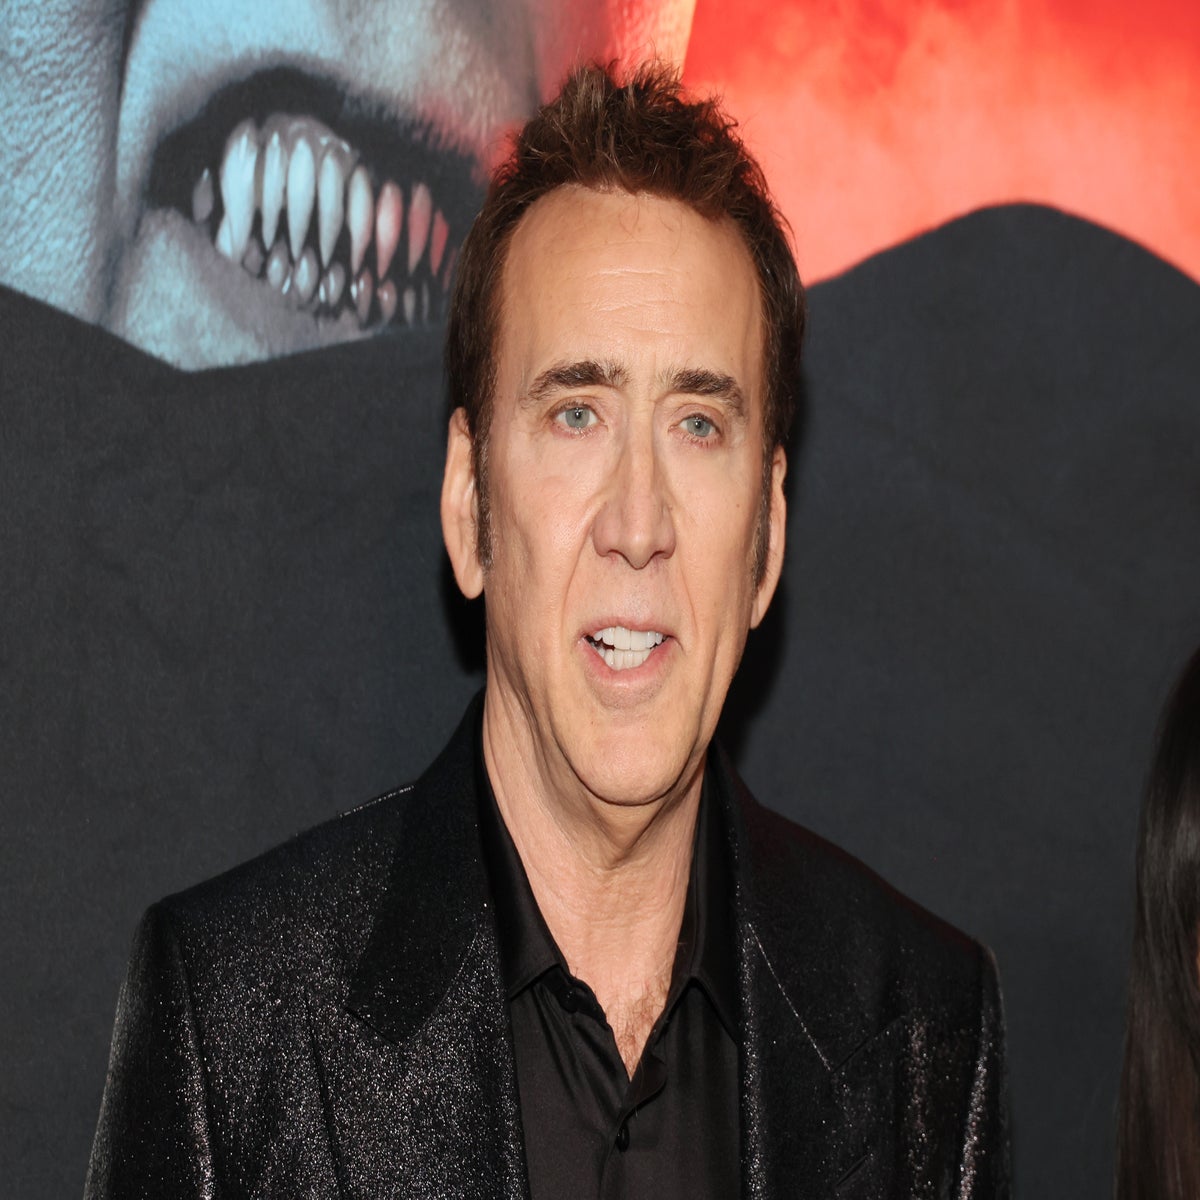 WAIT A MINUTE nic cages son is a metal head - #139259836 added by  mrwalkerfour at The Cage